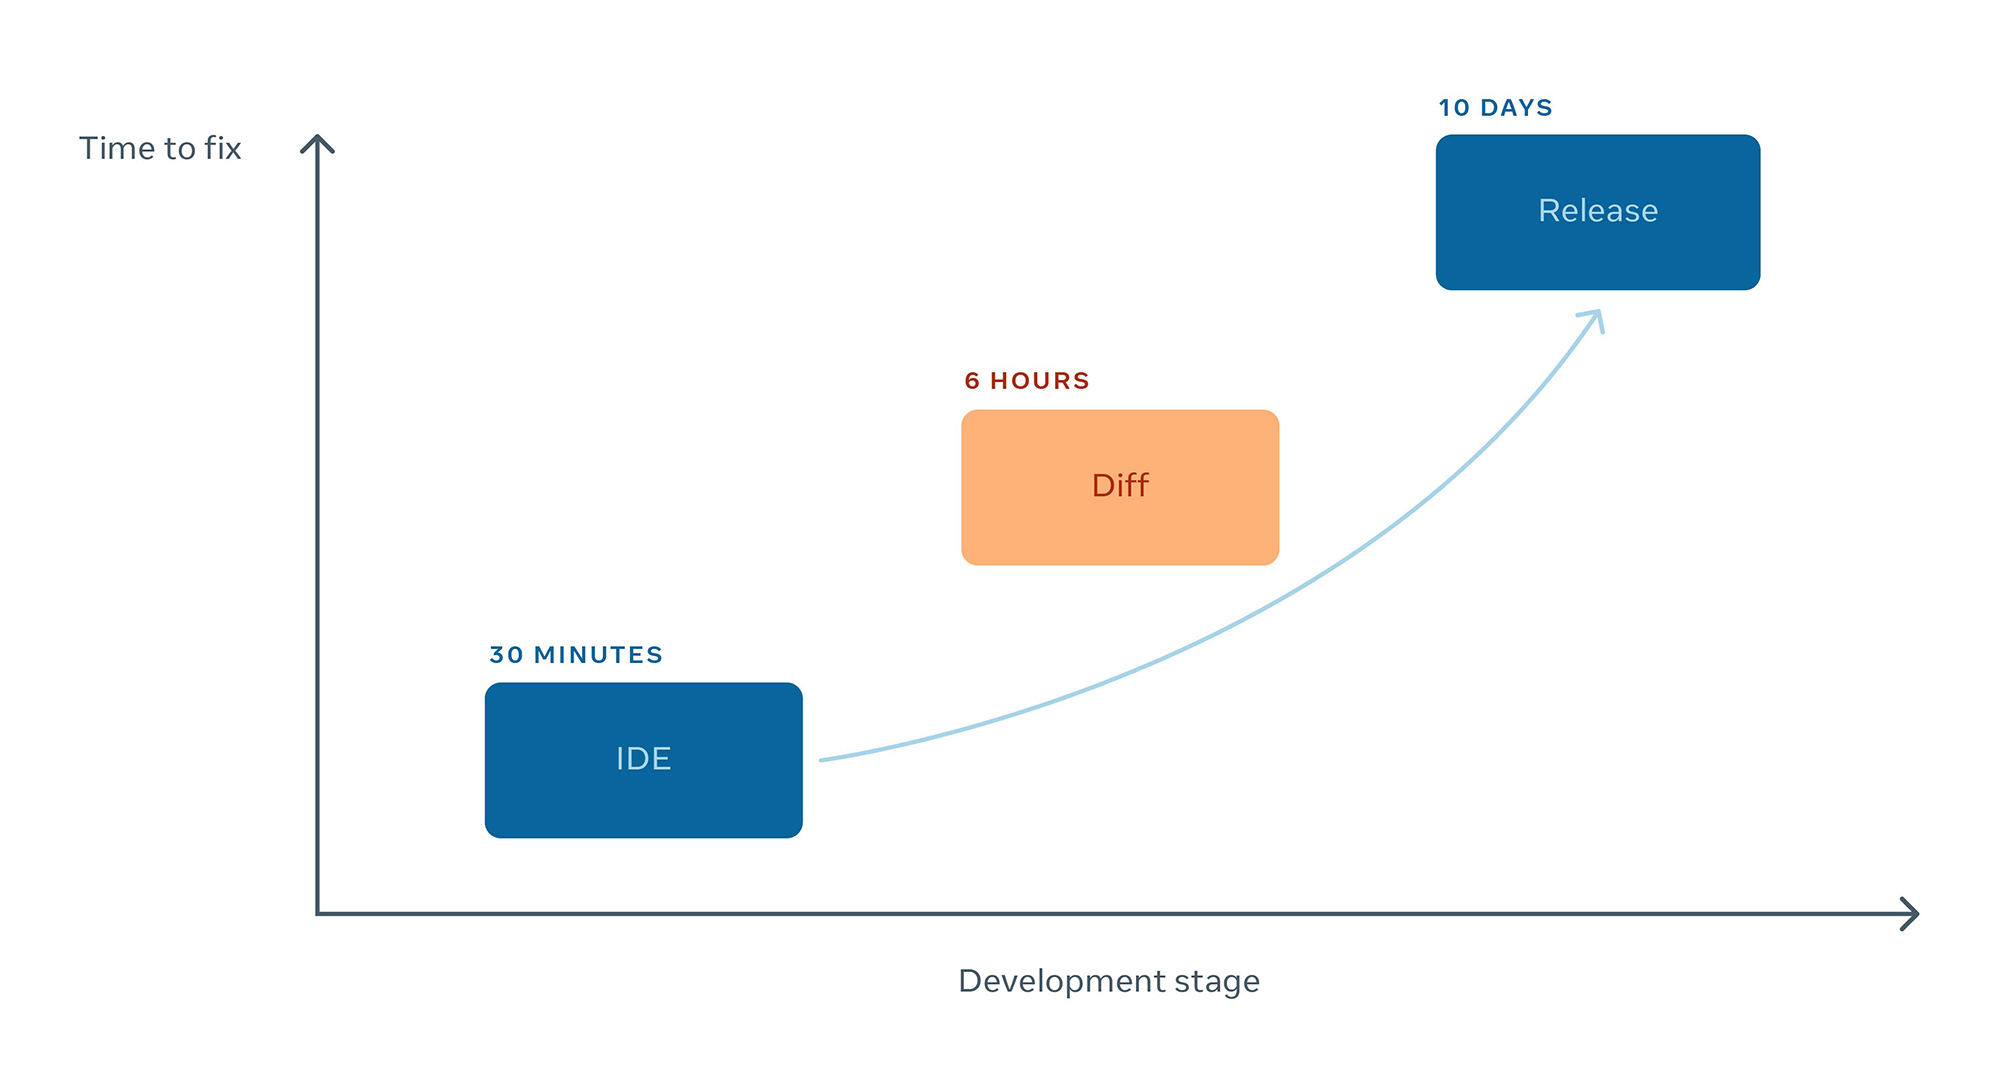 Average time required to fix issues increases exponentially the further a defect makes it in the development stage. 